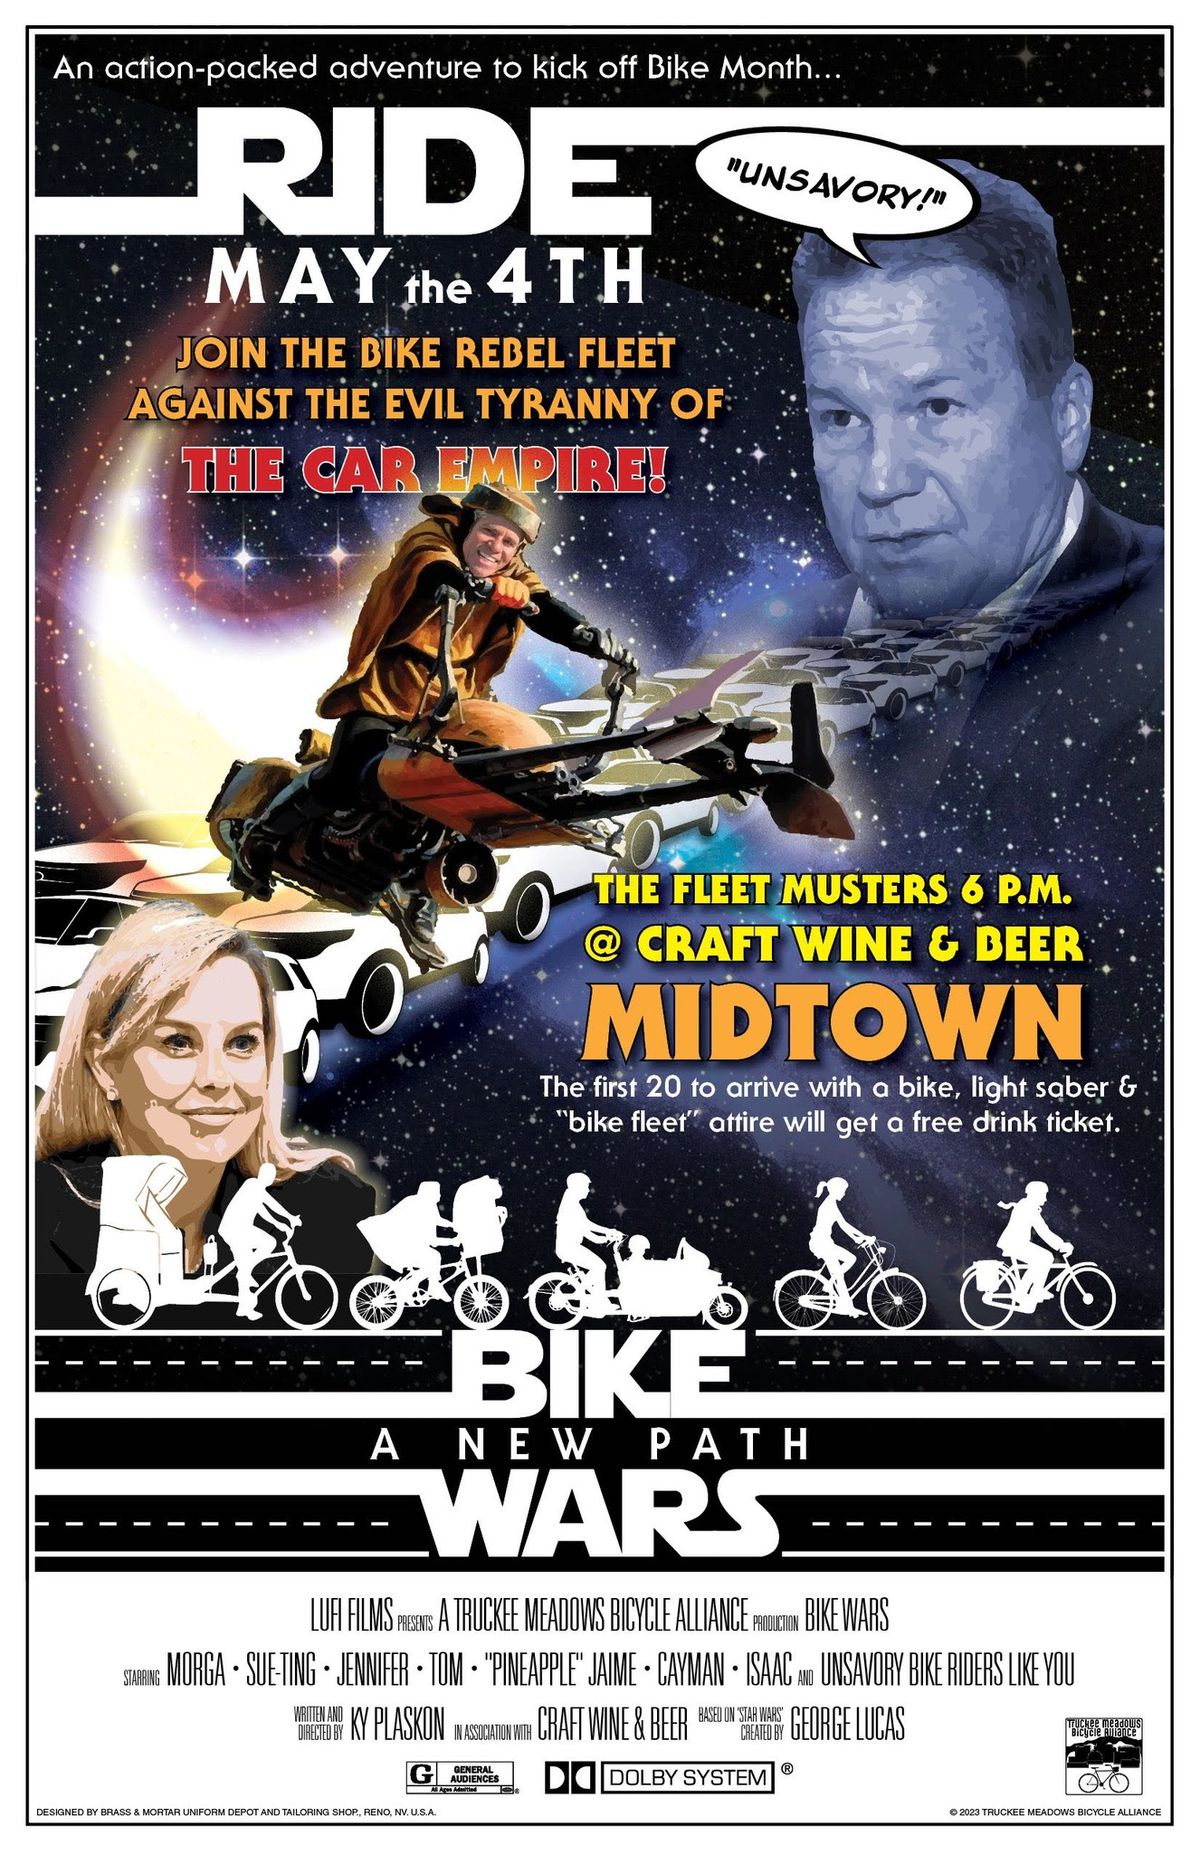 May the 4th Be With You Bike War!